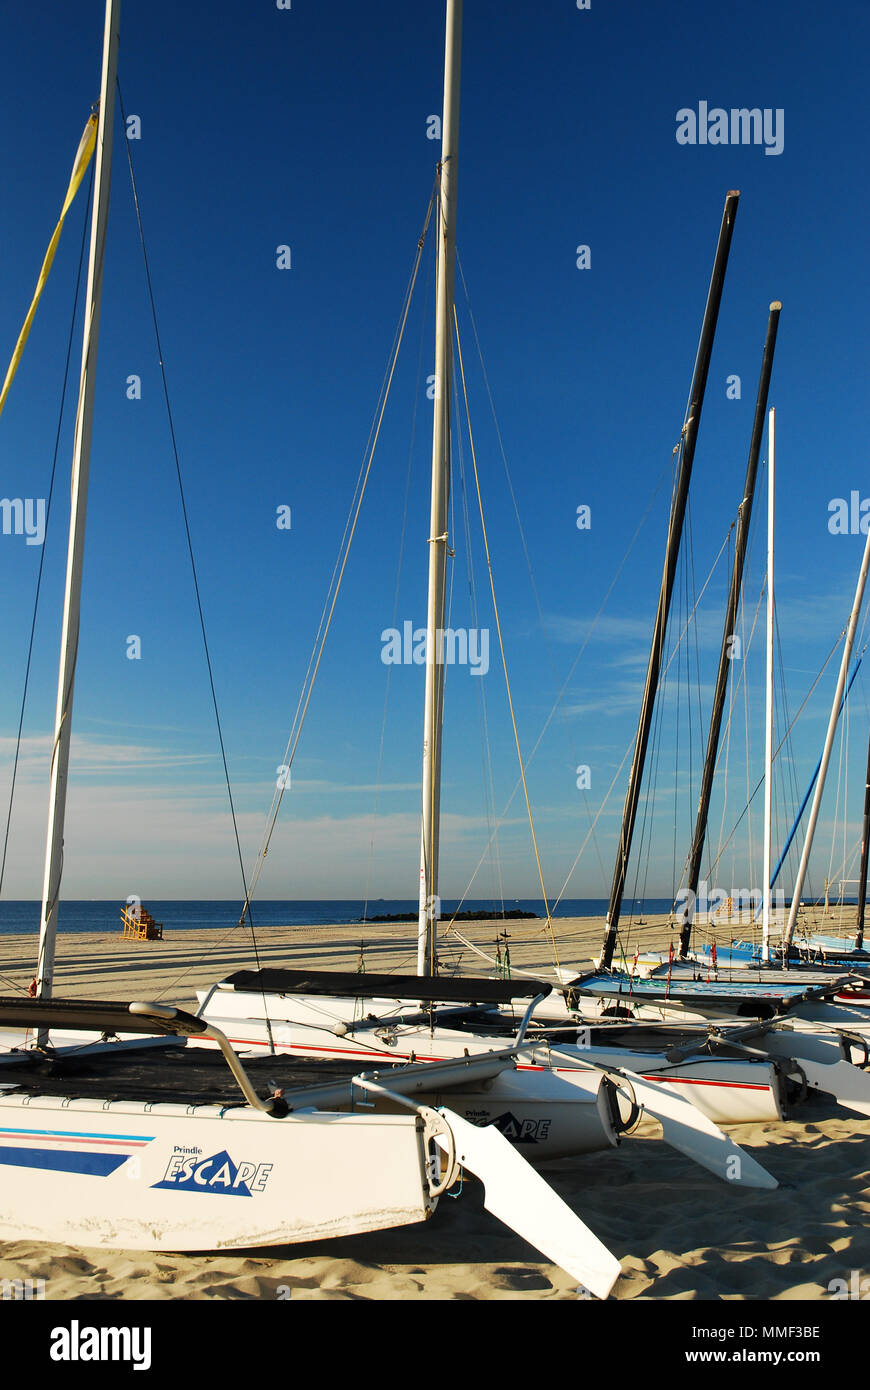 Catamarans are lined up on the Jersey Shore, waiting for the next adventurer. Stock Photo